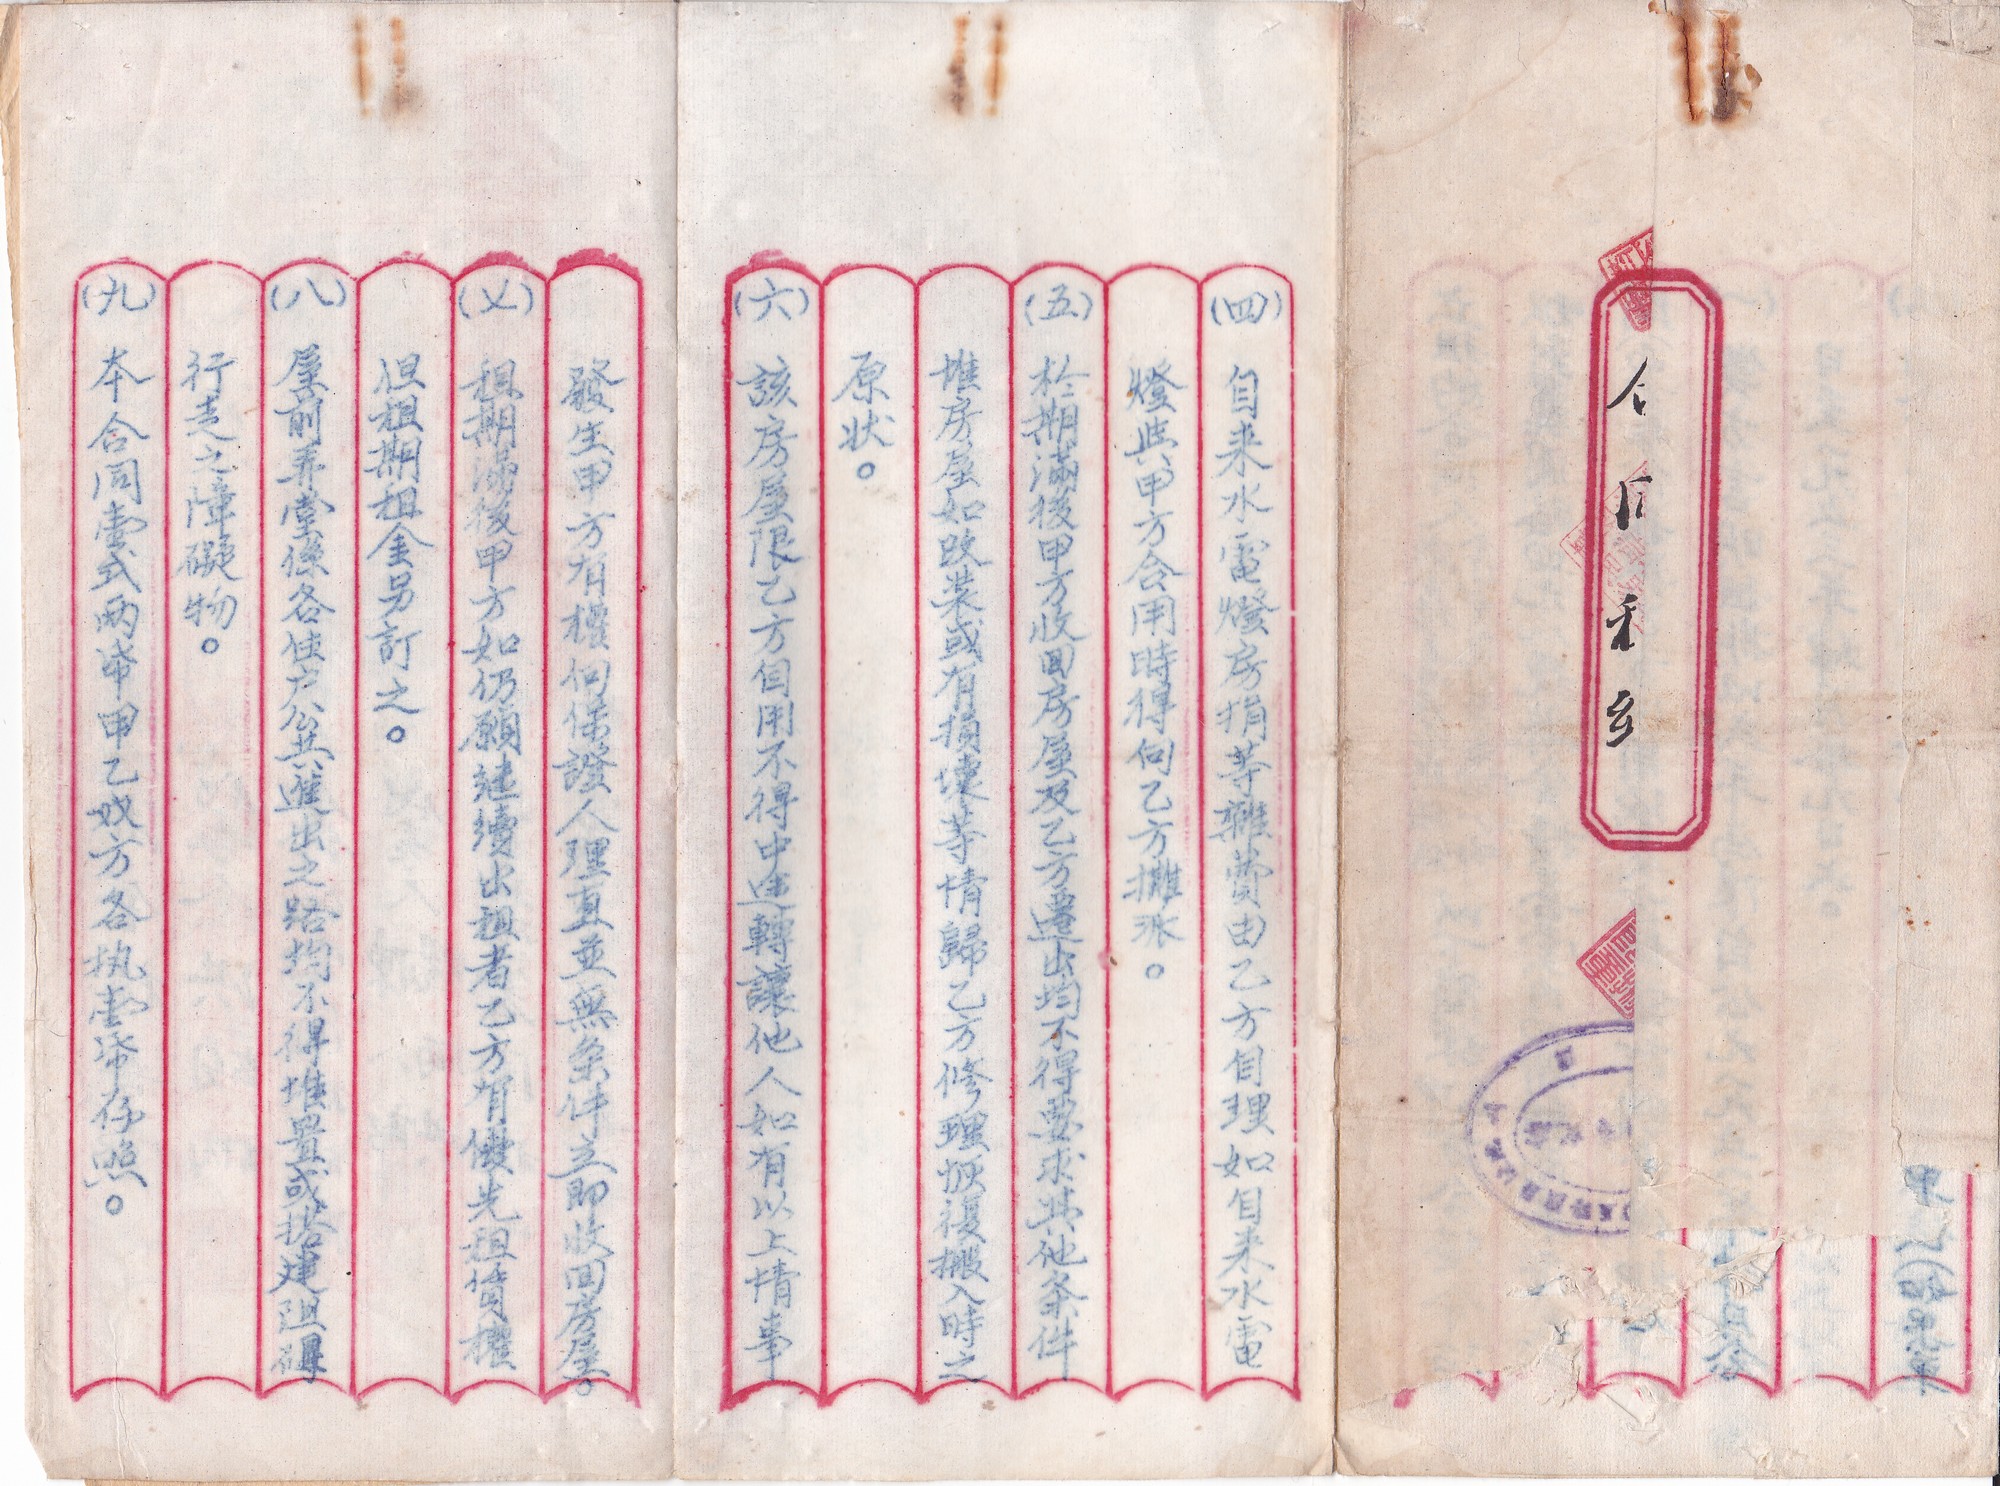 D4039, Real Estate Deed of Shanghai 1951, with 15 pcs Revenue Stamps